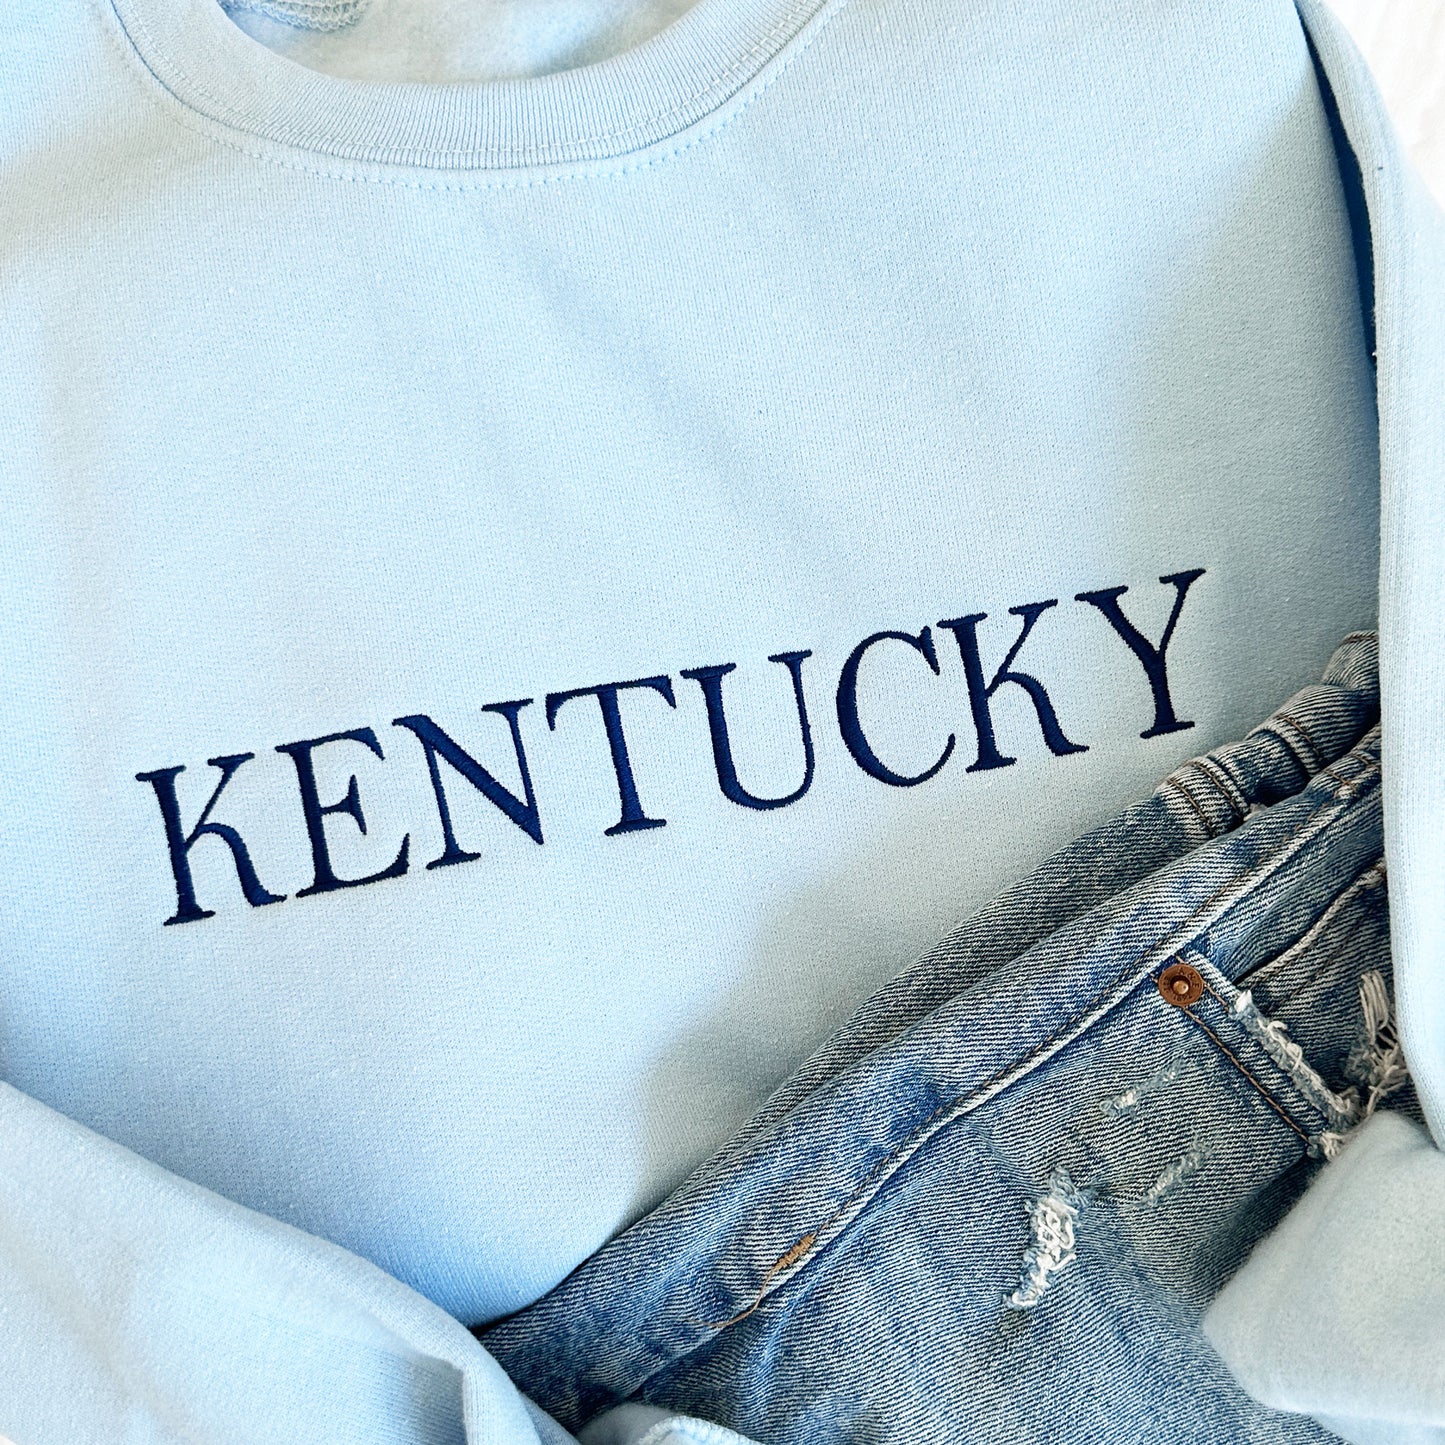 close up of a light blue crewneck sweatshirt with embroidered Kentucky in navy thread